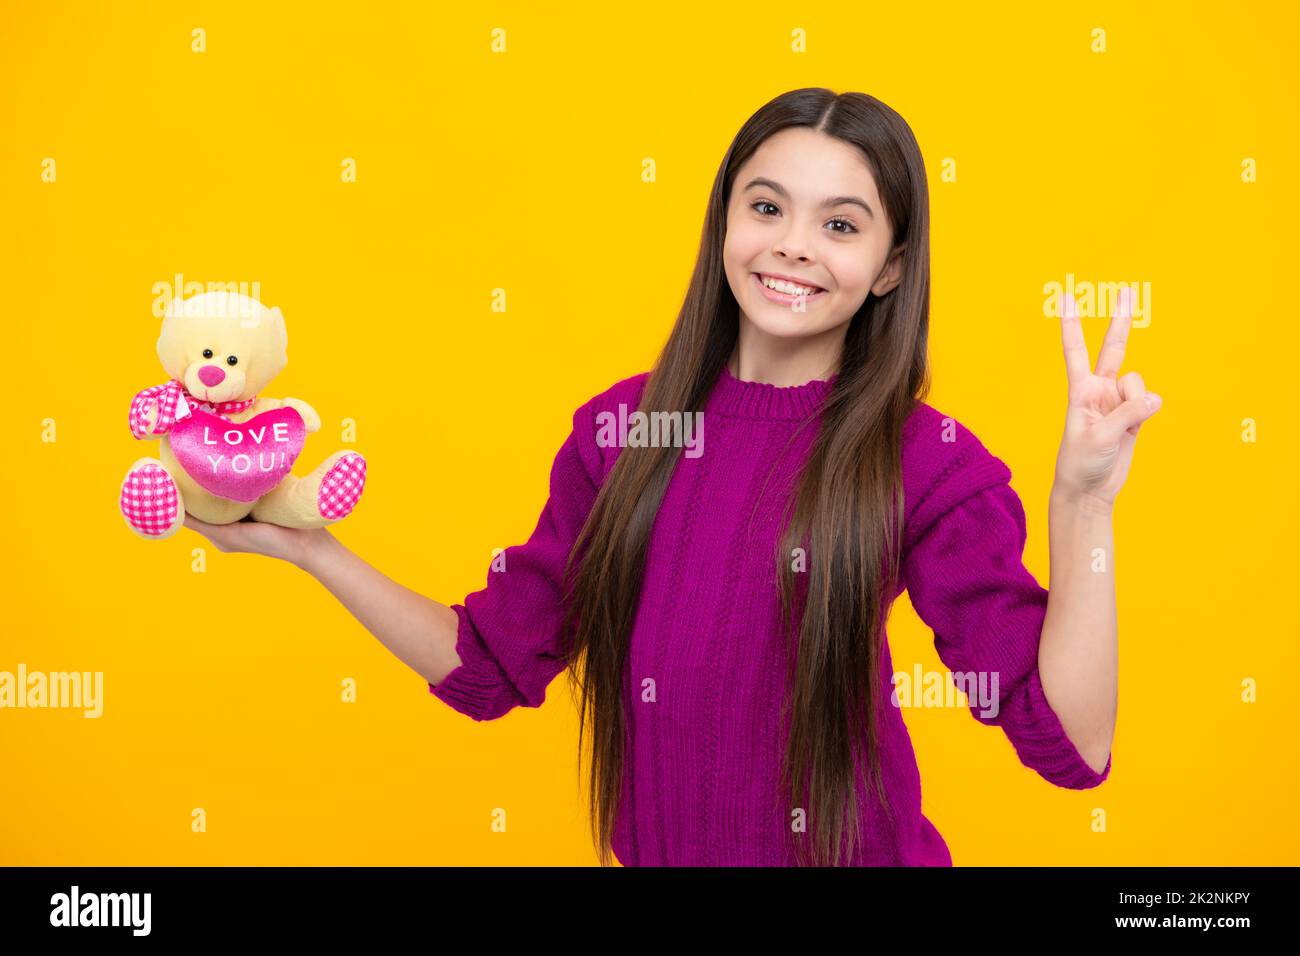 Cheerful teen child hold toy. Happy childhood. Kid playing toy. Teen with toy teddy bear with love heart for valentines day. Childcare concept. Stock Photo